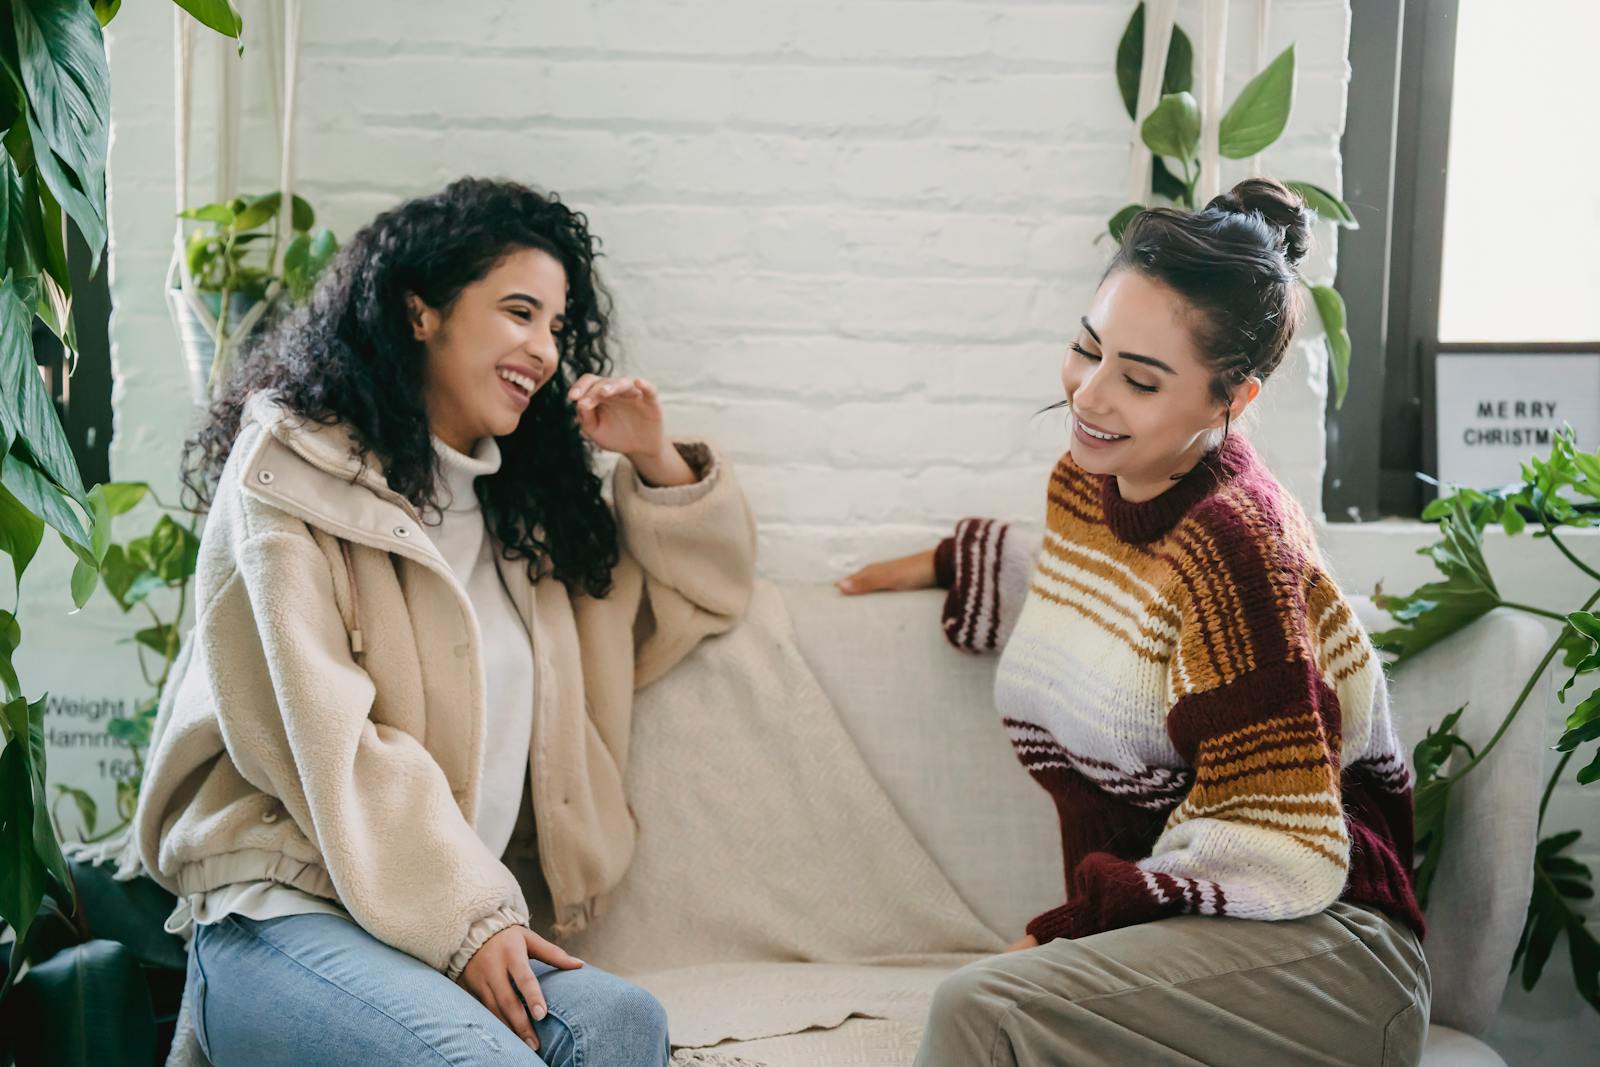 Friendship Photo by Julia Larson  from Pexels: https://www.pexels.com/photo/happy-young-women-sitting-on-couch-and-talking-6113422/